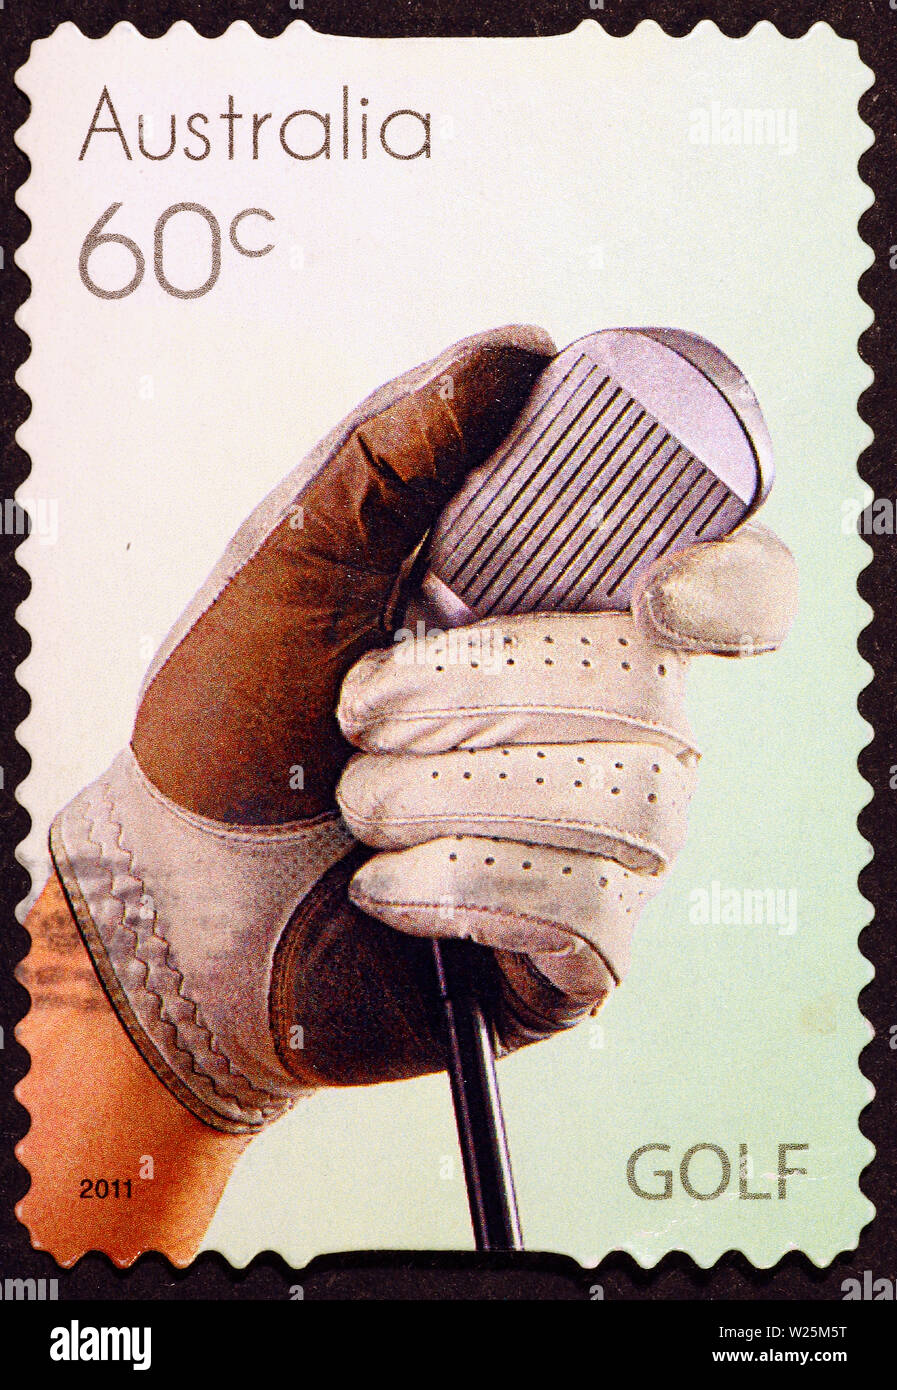 Golf club and player's hand on postage stamp Stock Photo